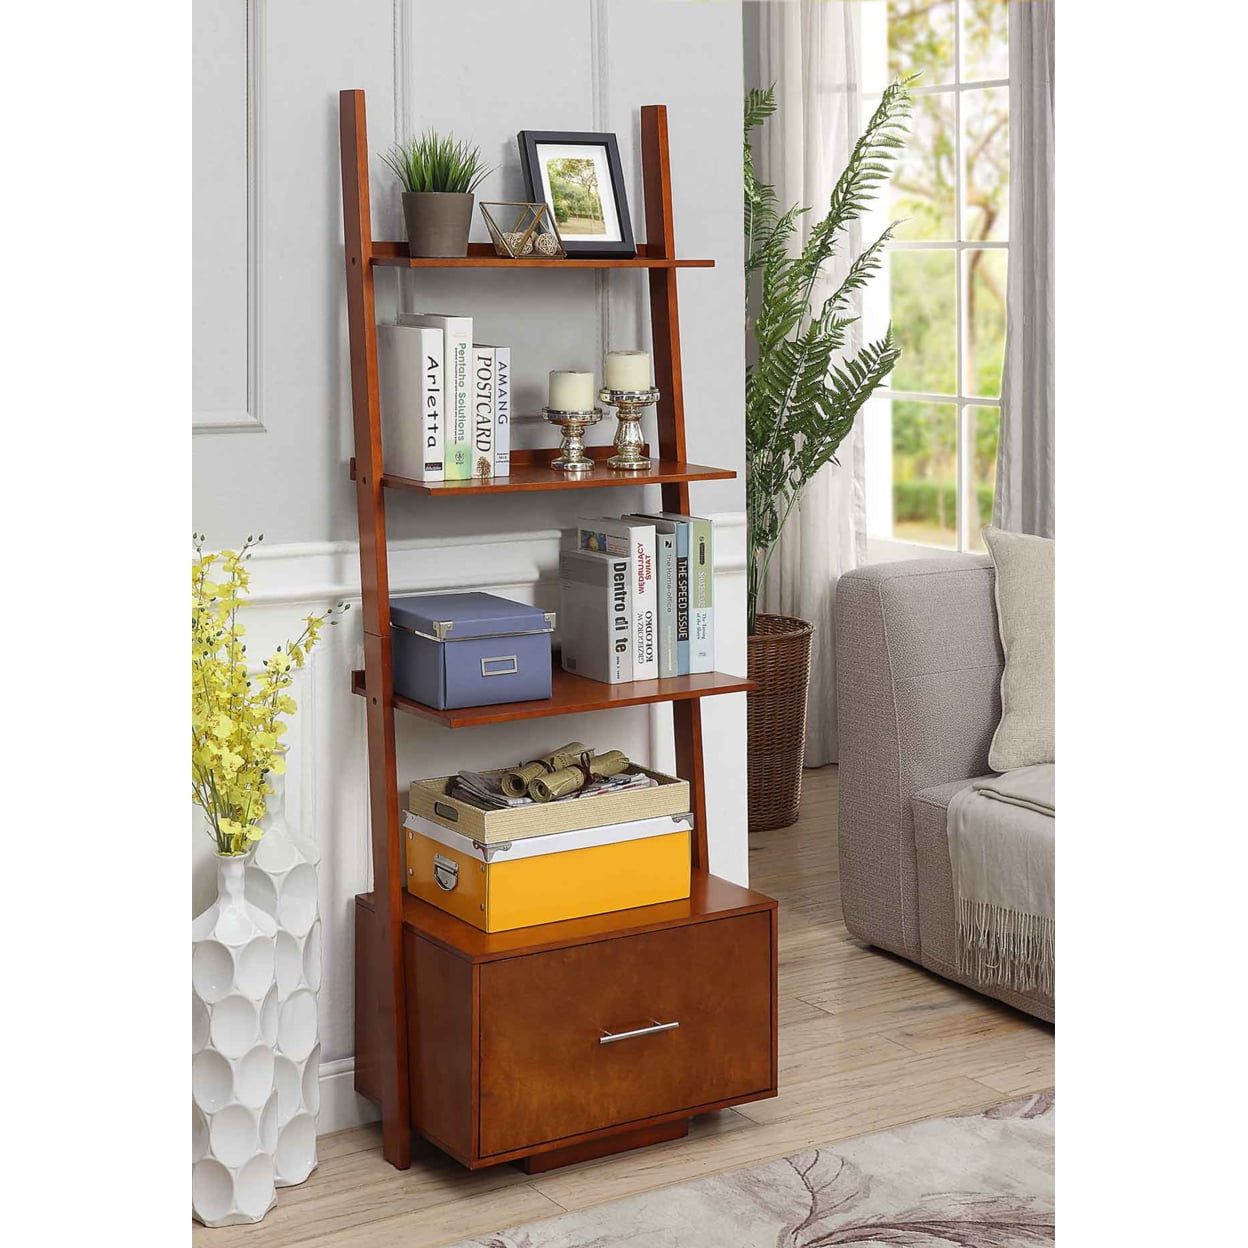 Picture of Convenience Concepts 8043491CH American Heritage Ladder Bookcase with File Drawer, Cherry - 69 x 15.75 x 24.75 in.